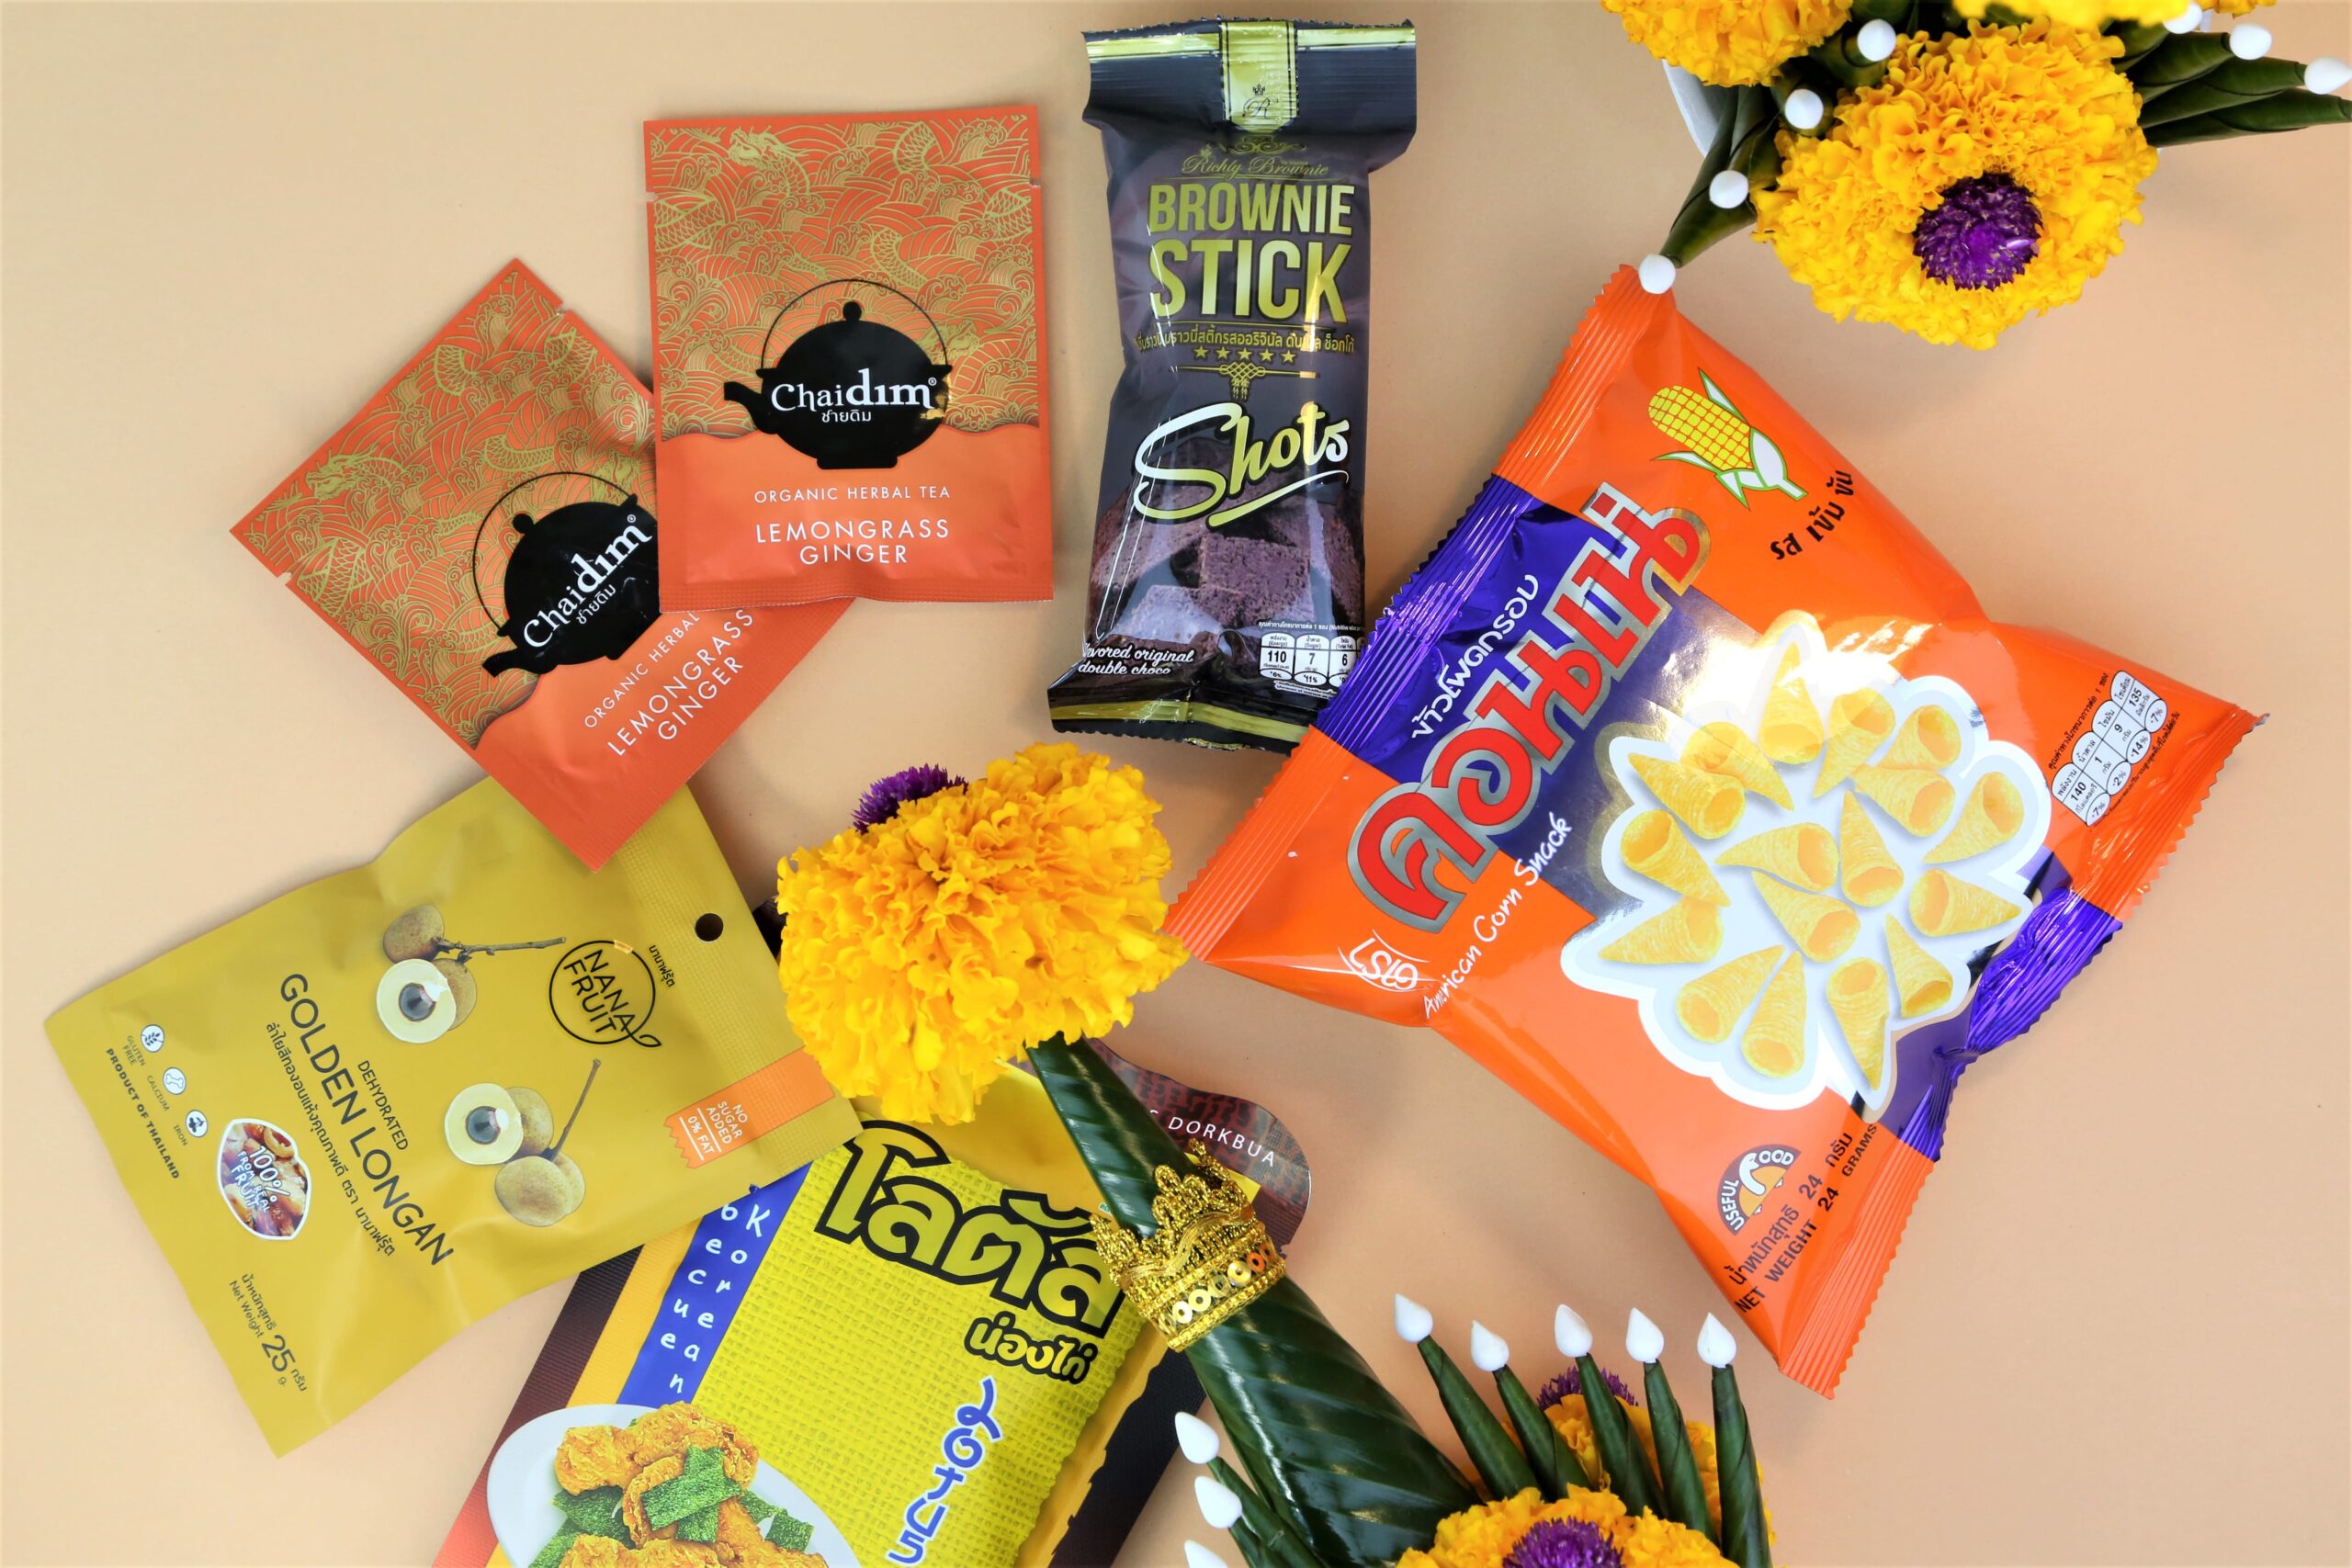 Loy Krathong festival theme snacks shipped from Thailand